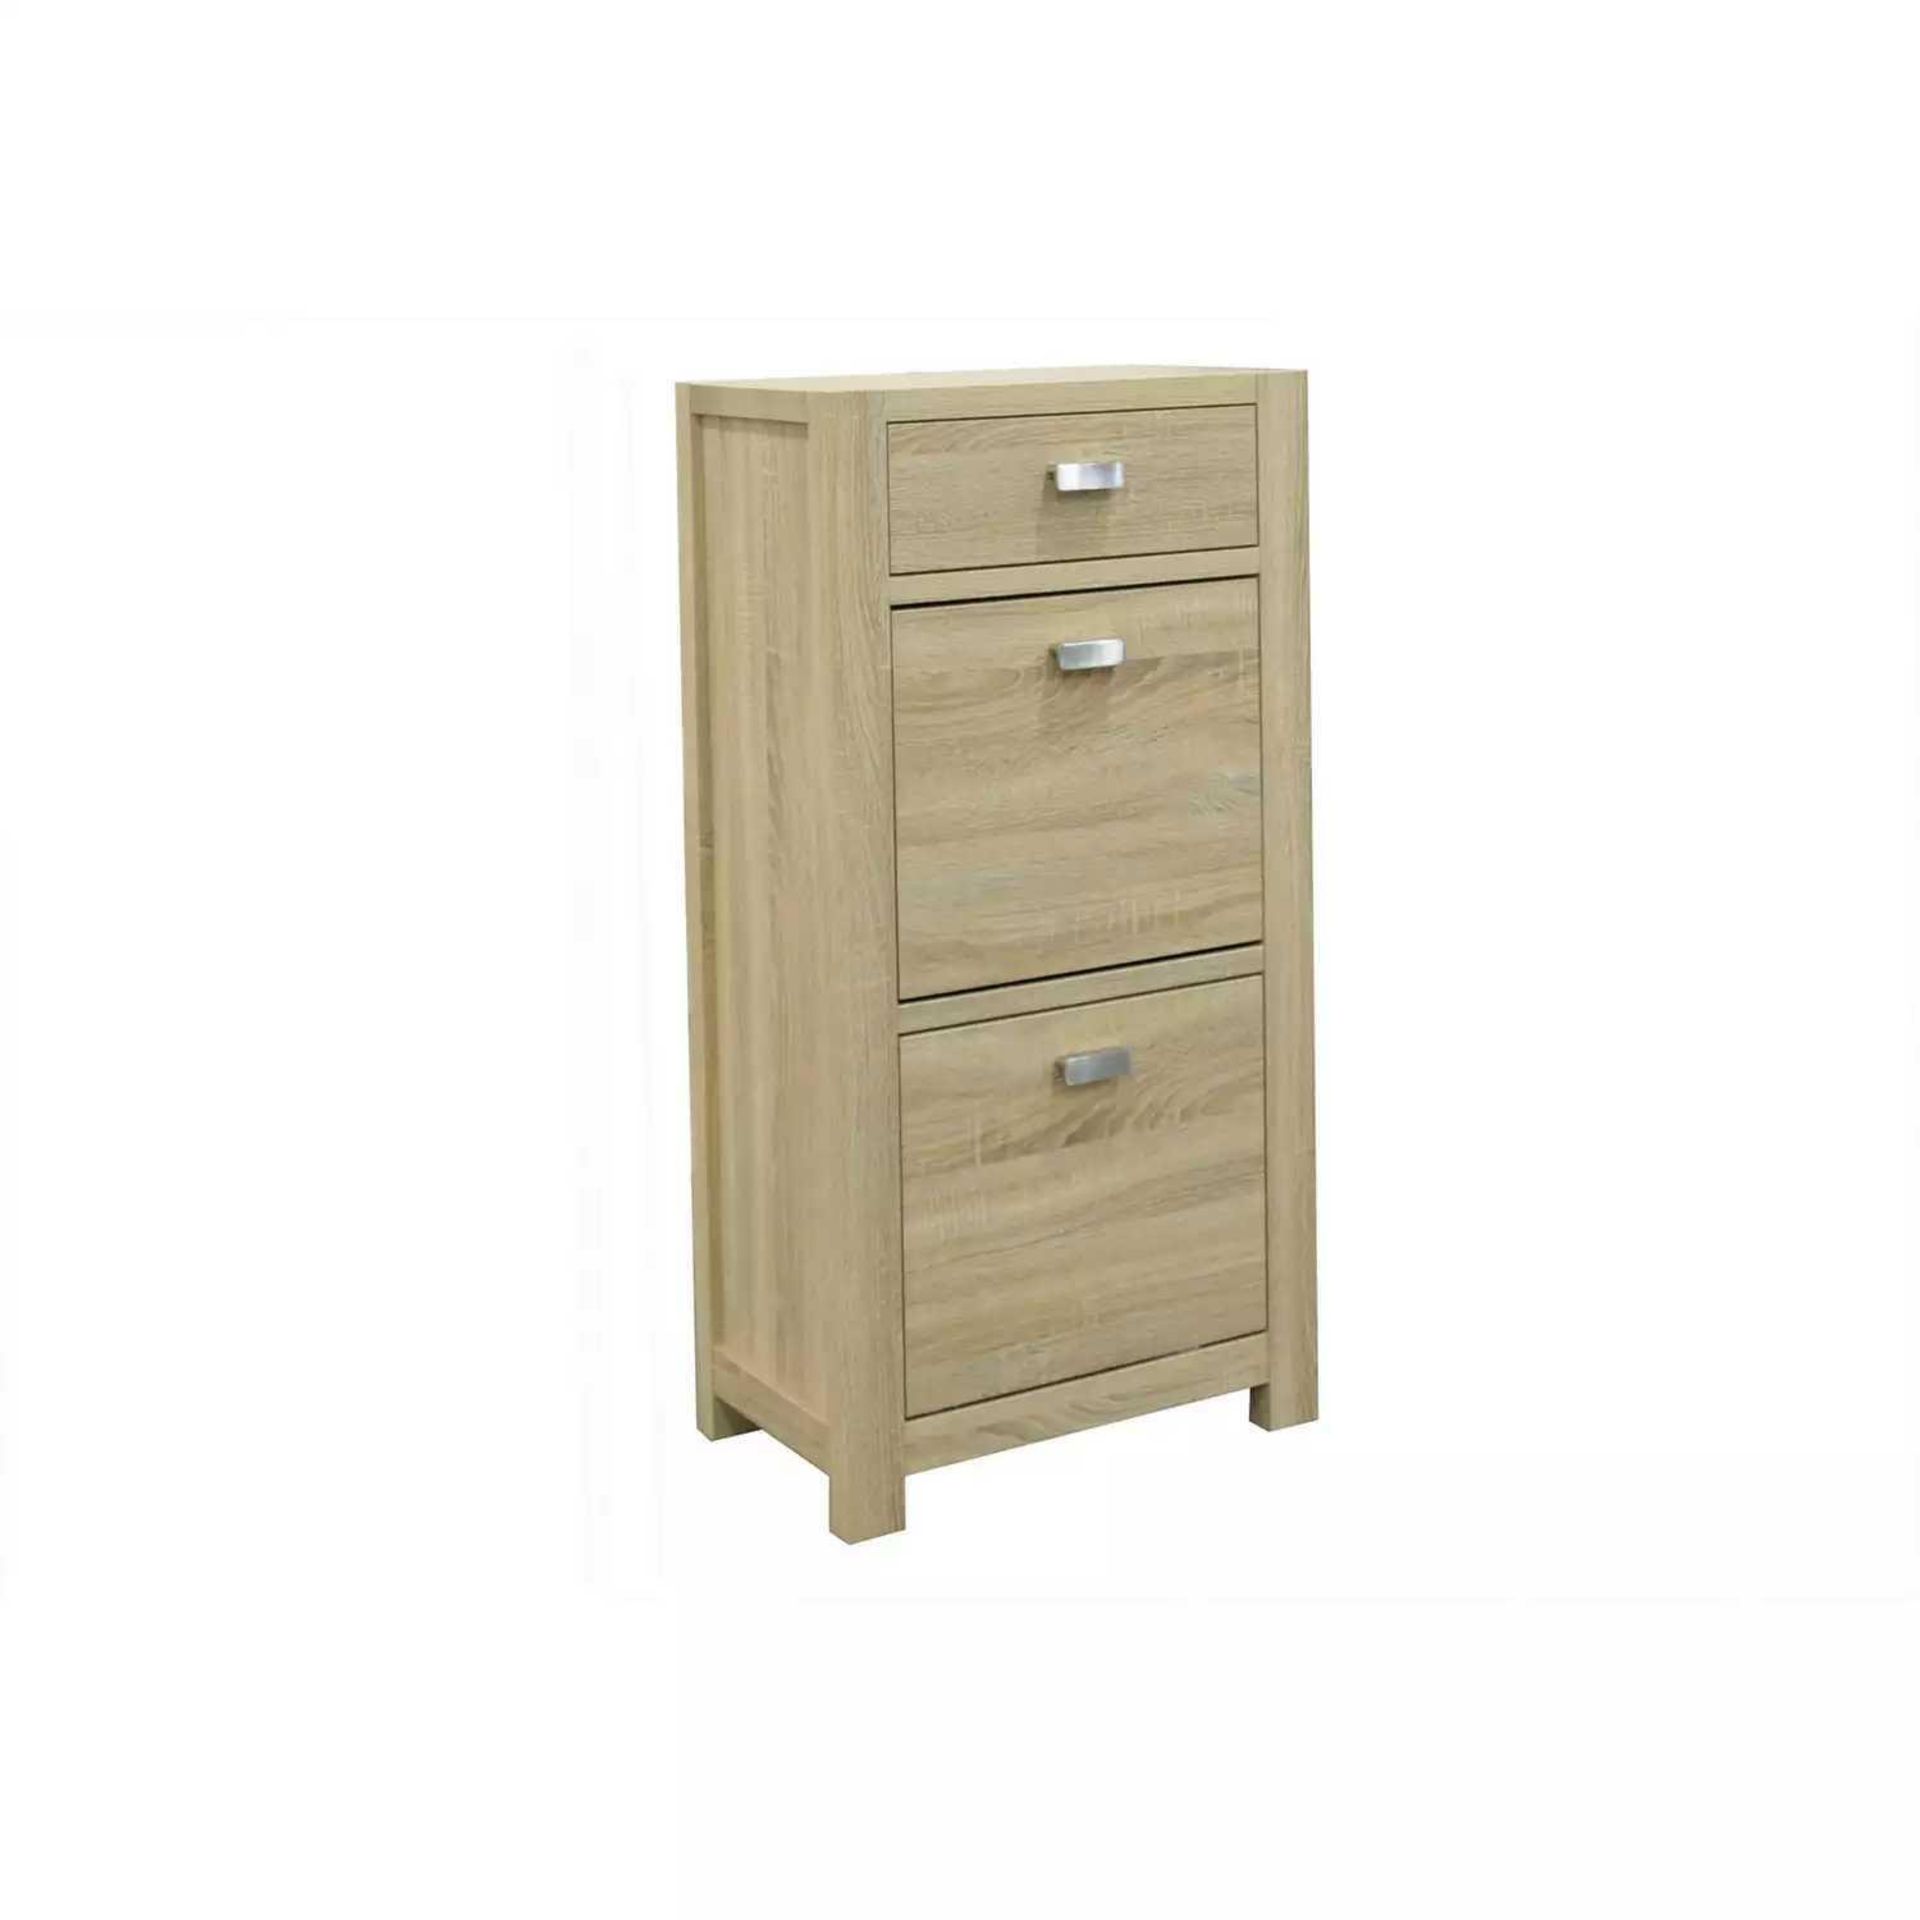 Rrp £280 Clever Shoe Cabinet